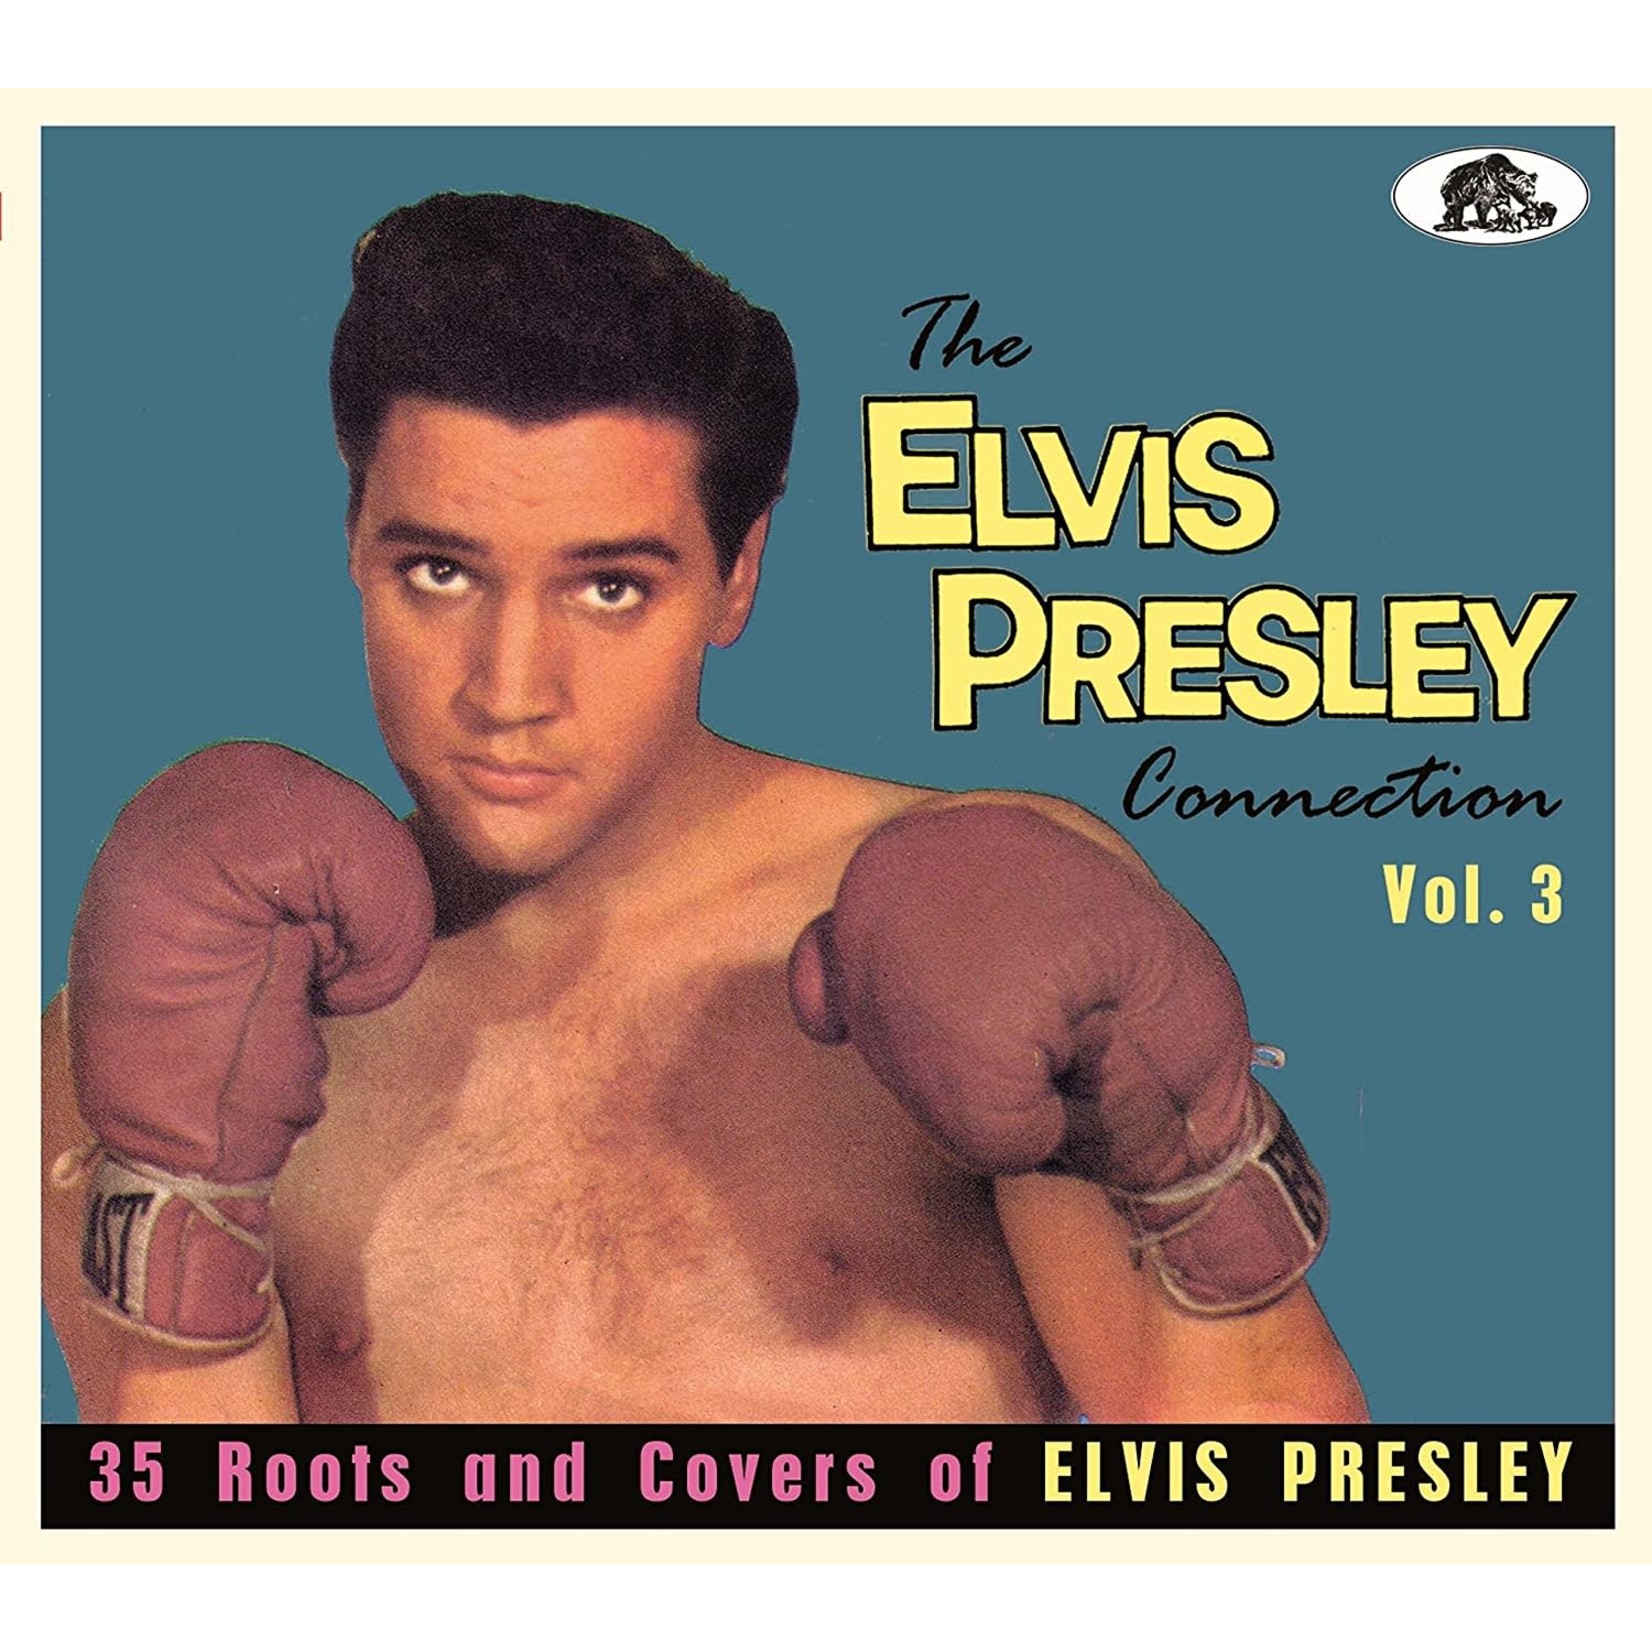 VARIOUS ARTISTS THE ELVIS PRESLEY CONNECTION VOL 3  CD